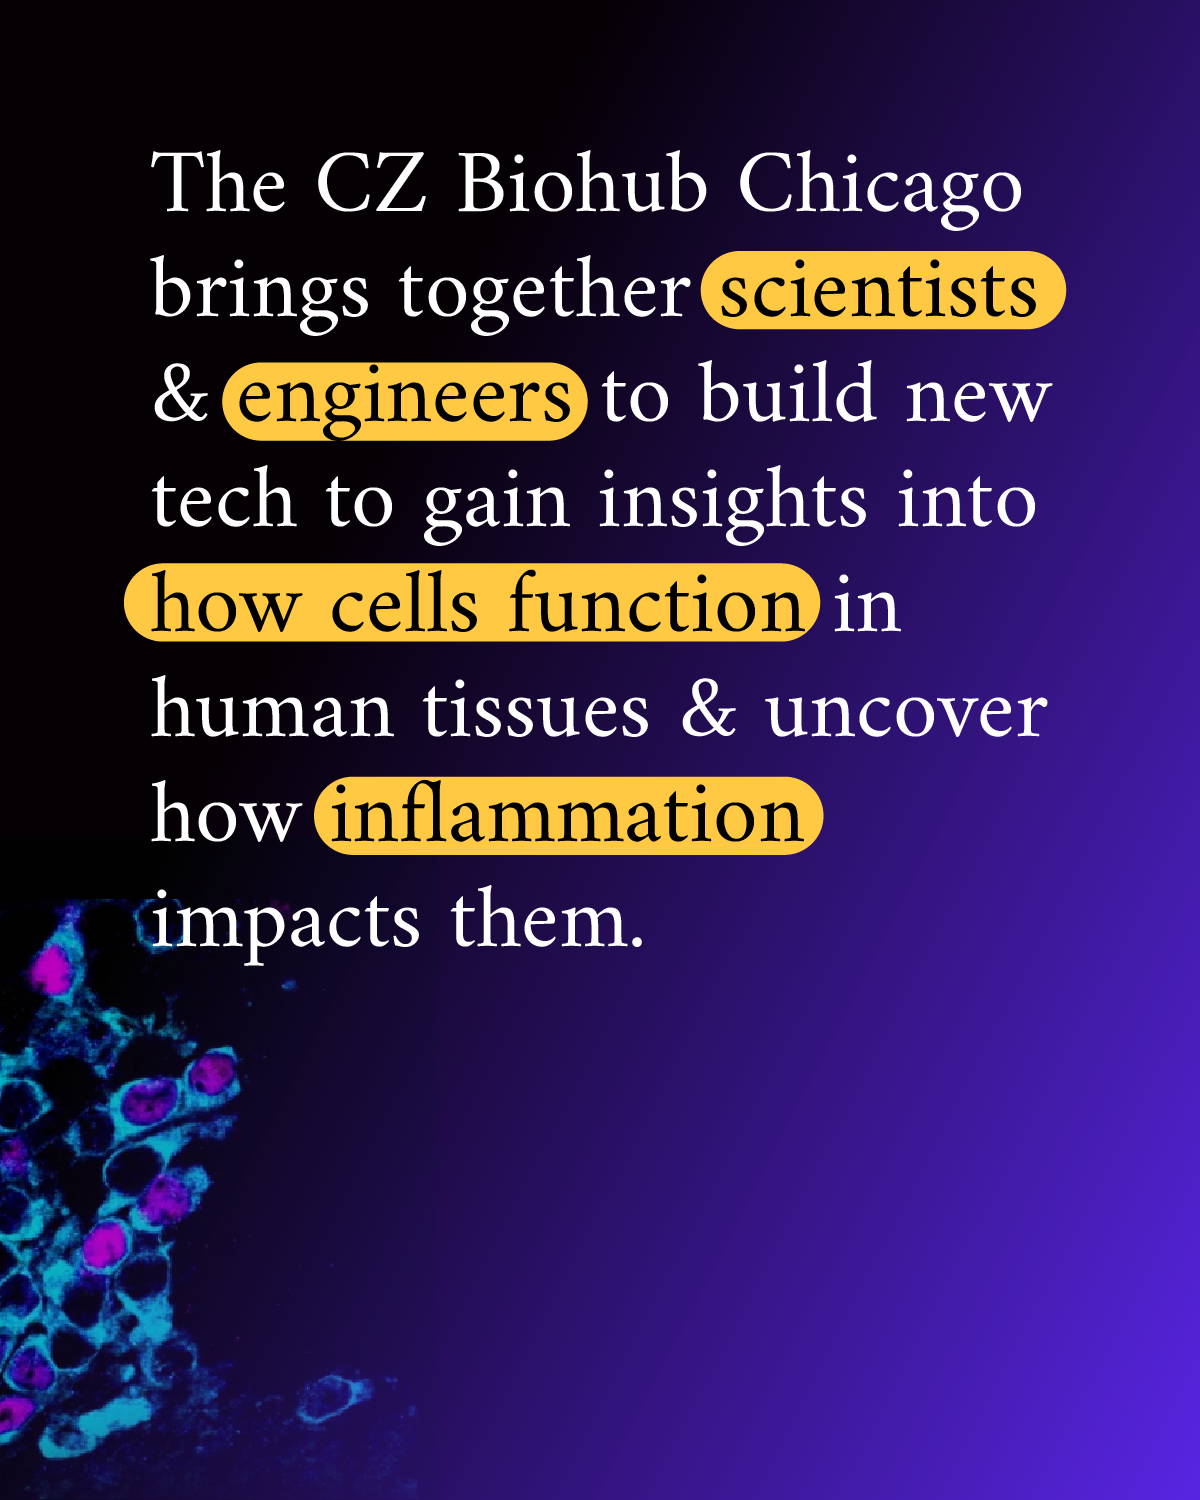 Infographic reads “The CZ Biohub Chicago brings together scientists & engineers to build new tech to gain insights into how cells function in human tissues & uncover how inflammation impacts them.” A photo of magnified cells in the brain region accompanies the text.